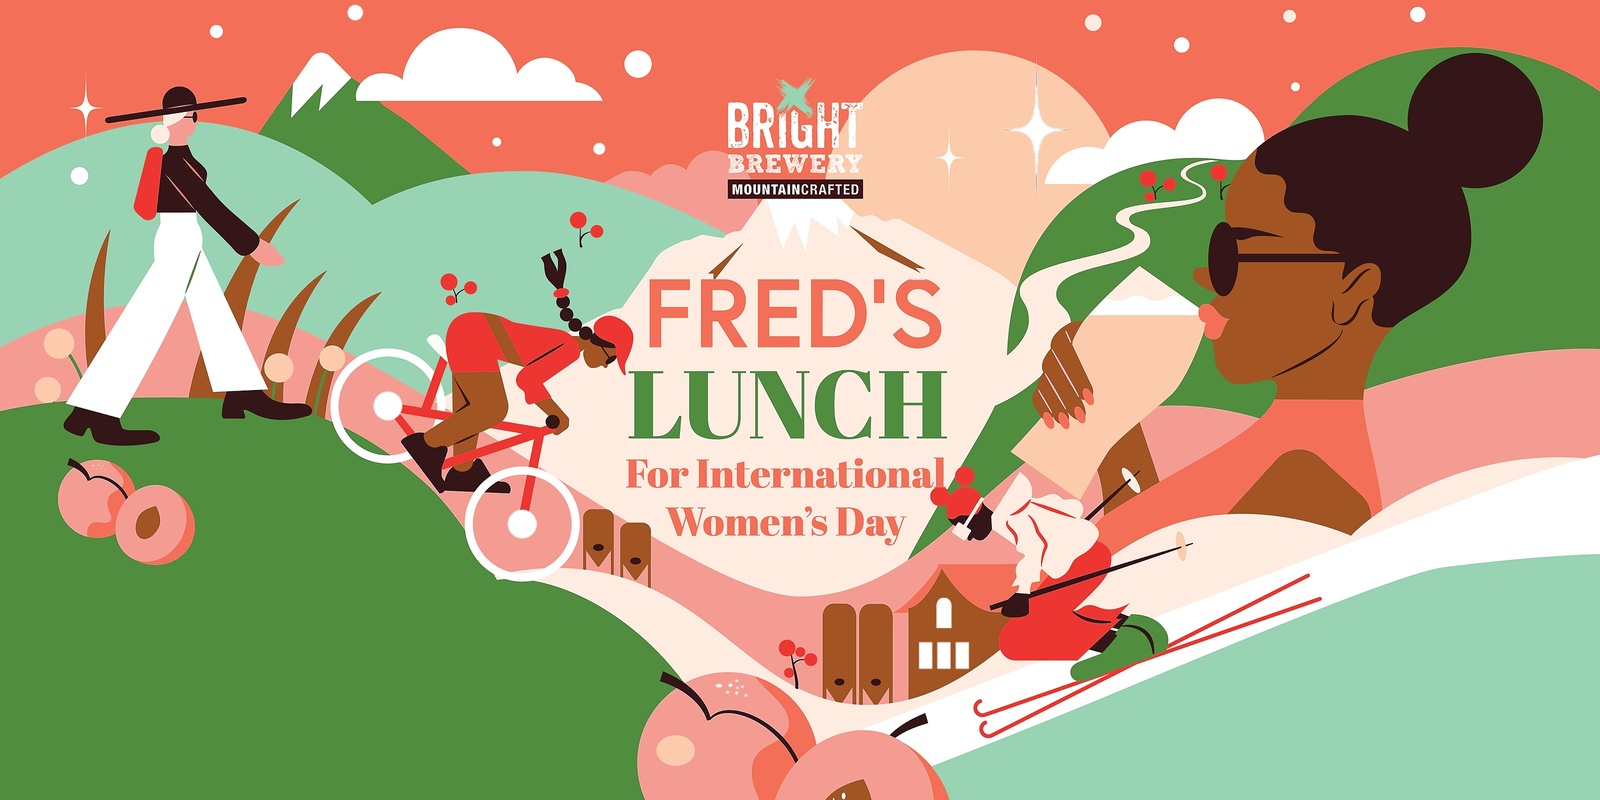 Banner image for Bright's International Women's Day Lunch